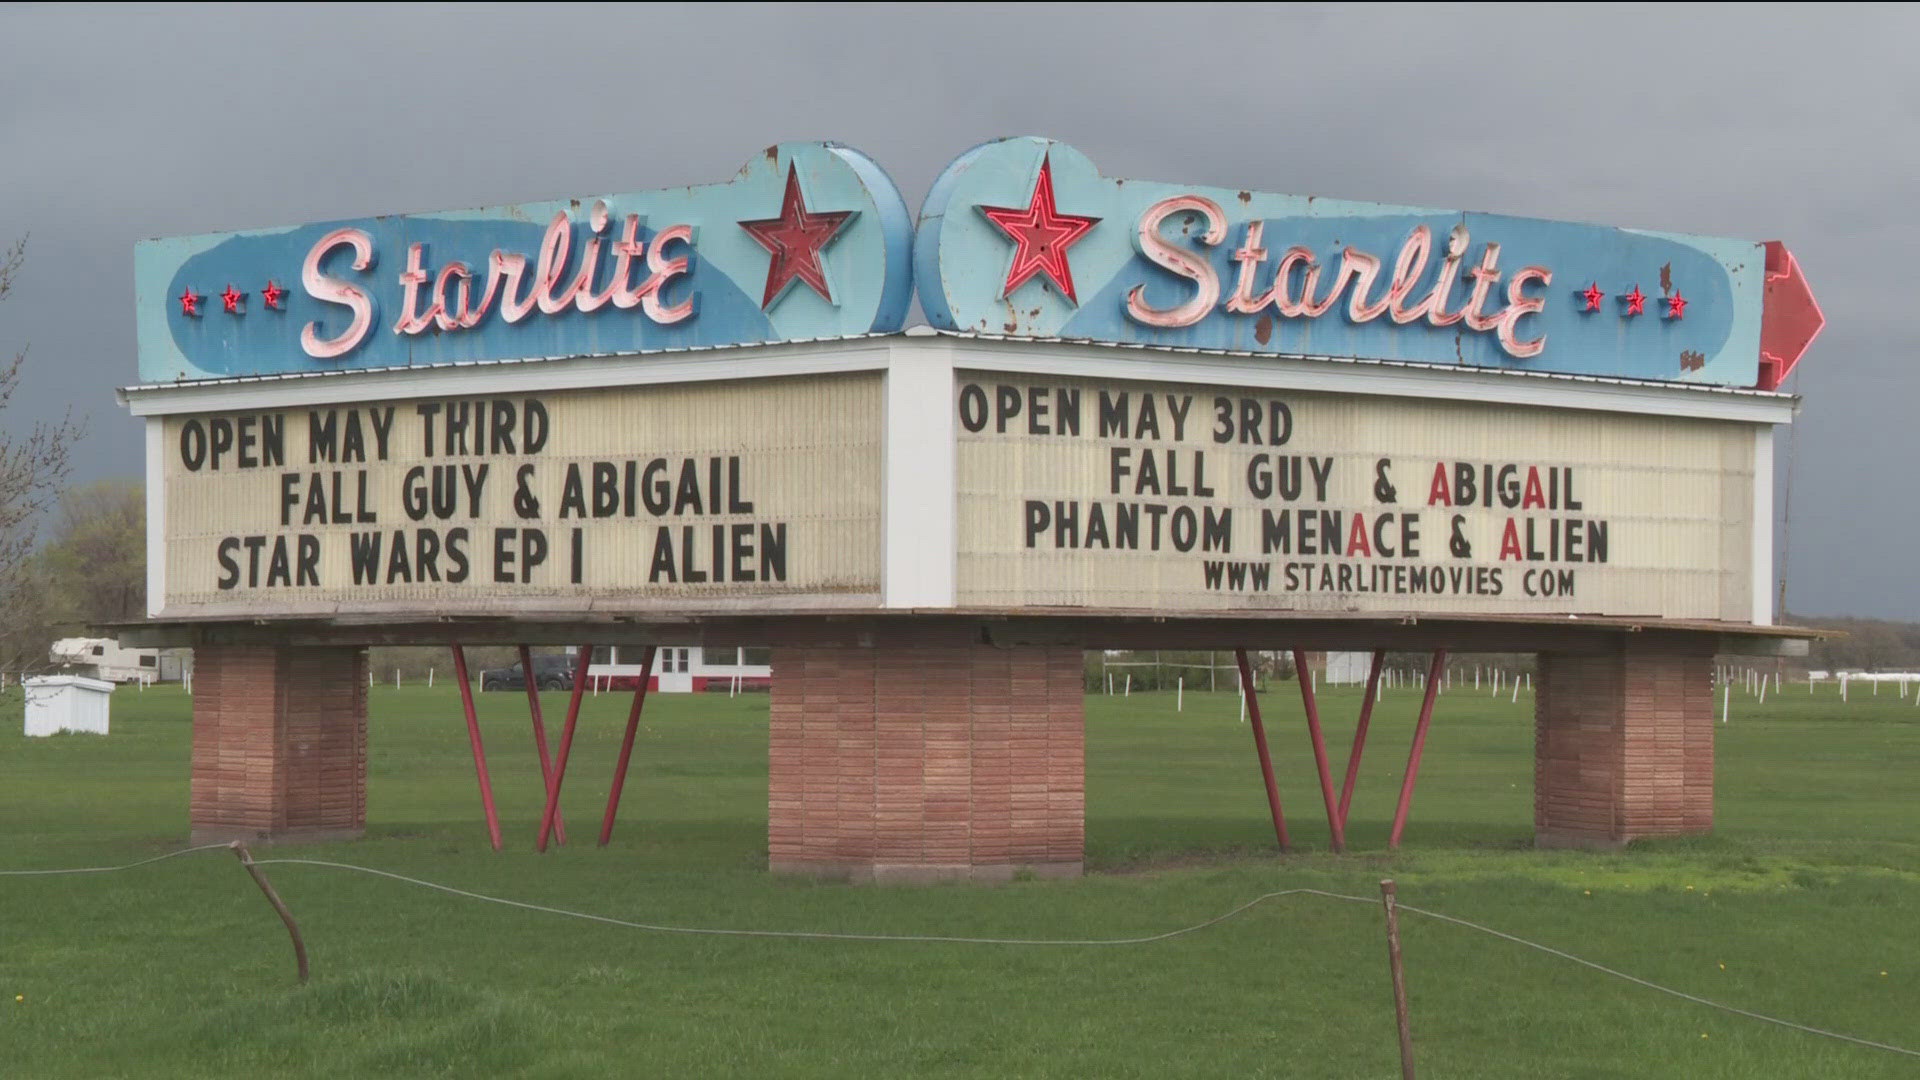 Back in the 50's there were more than 4,000 drive-in theaters across the country. Now about 300 remain including the Starlite here in Litchfield